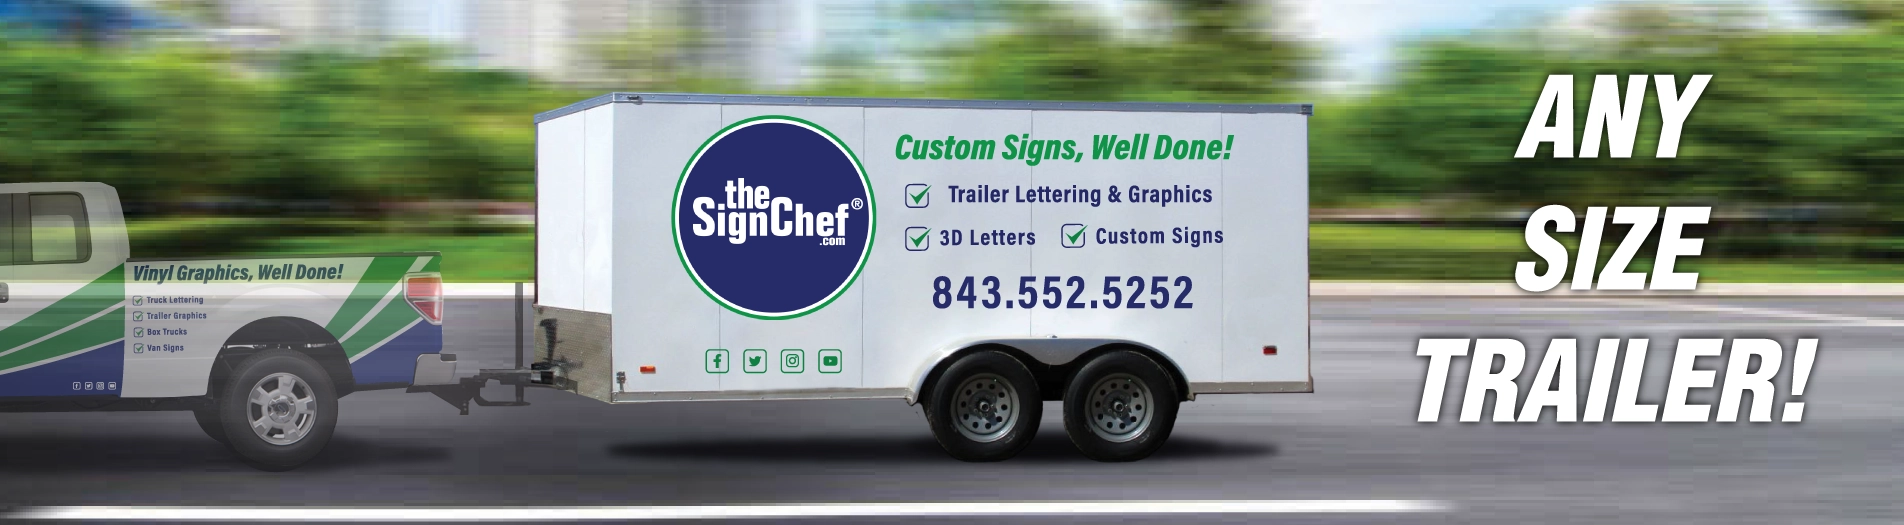 High-Impact Vinyl Lettering for Trailers - Customized Logos and Graphics